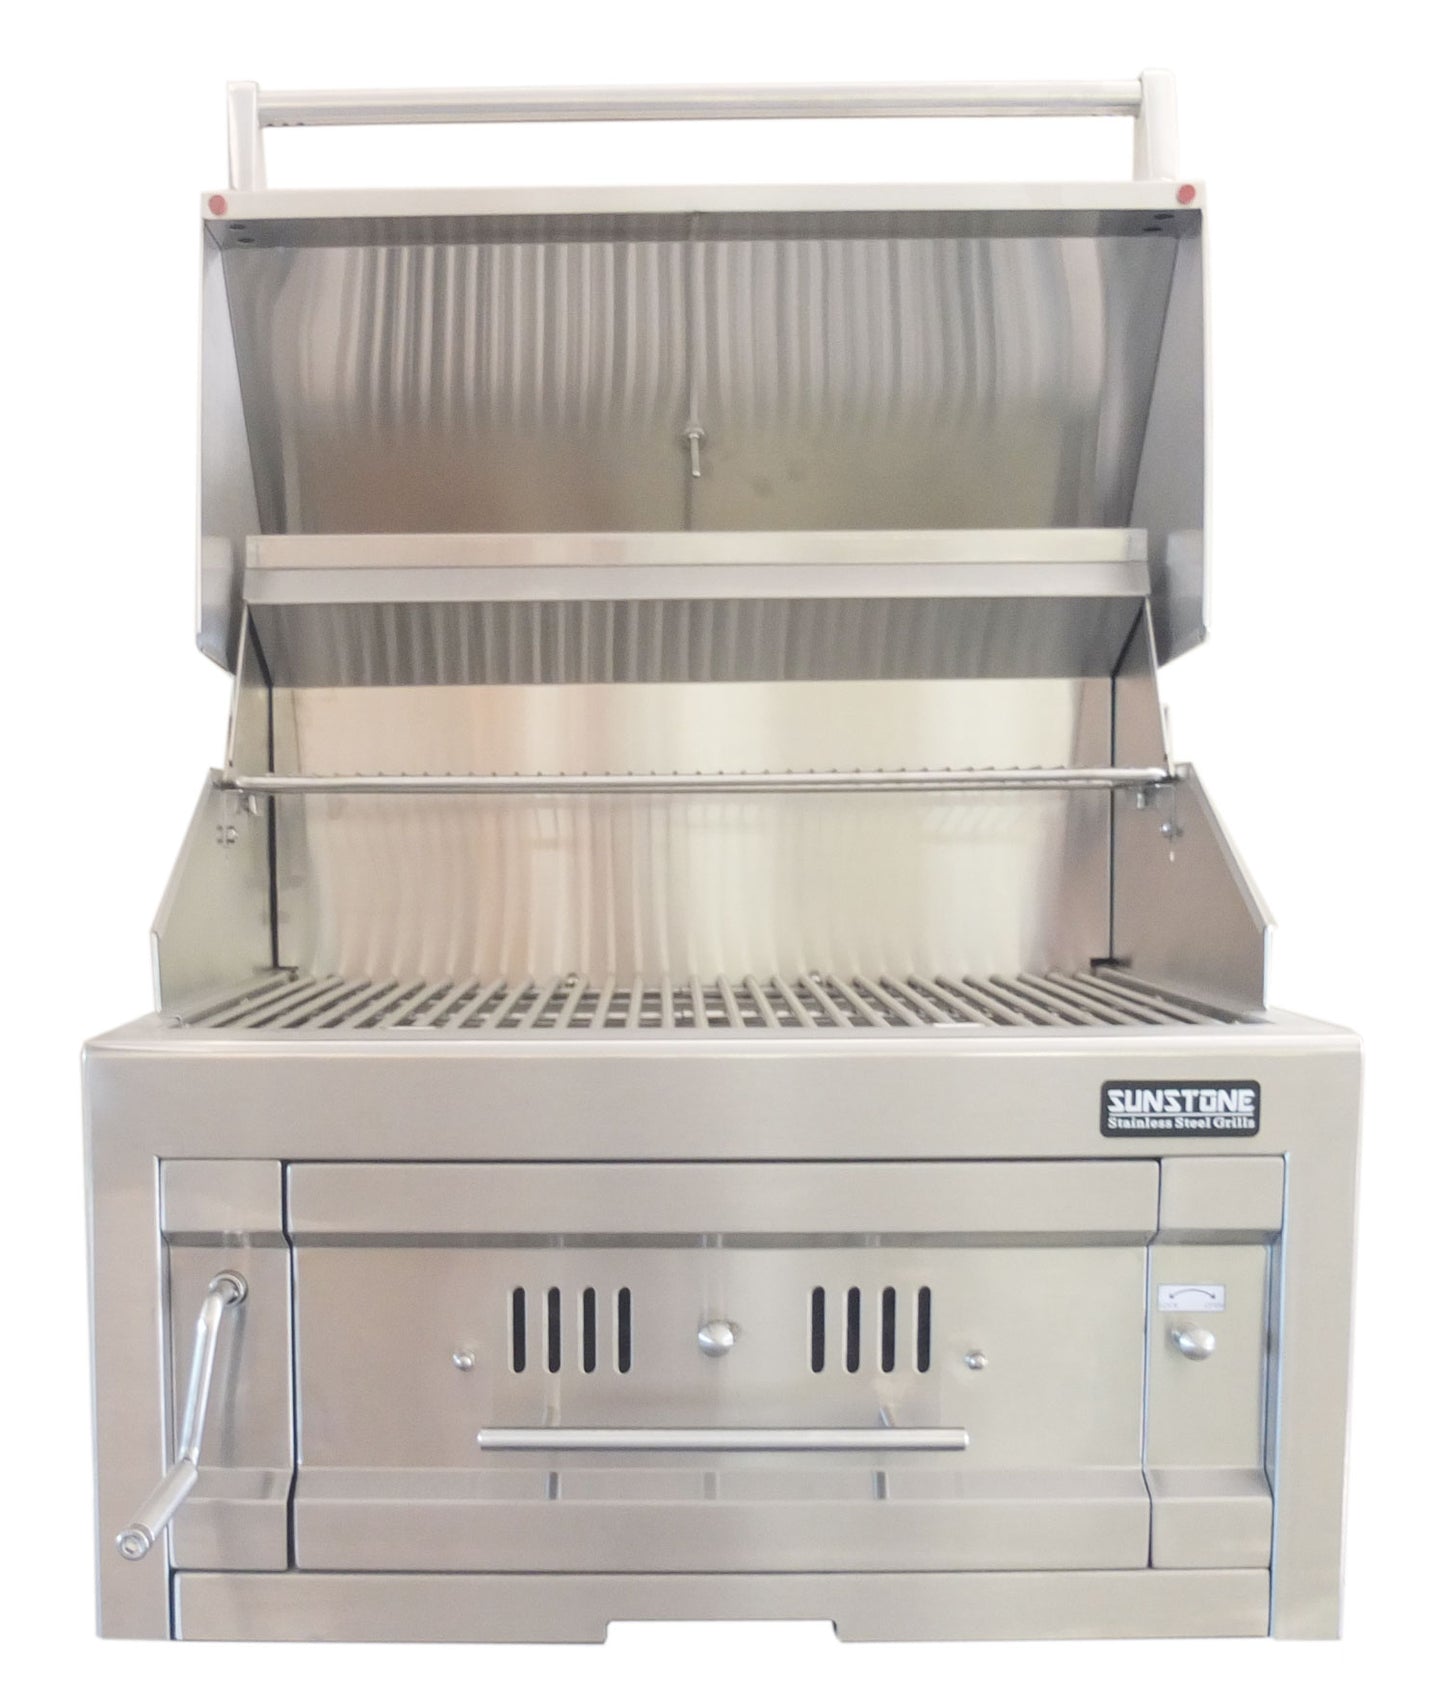 Sunstone 28" Single Zone 304 Stainless Steel Charcoal Grill - SUNCHSZ28